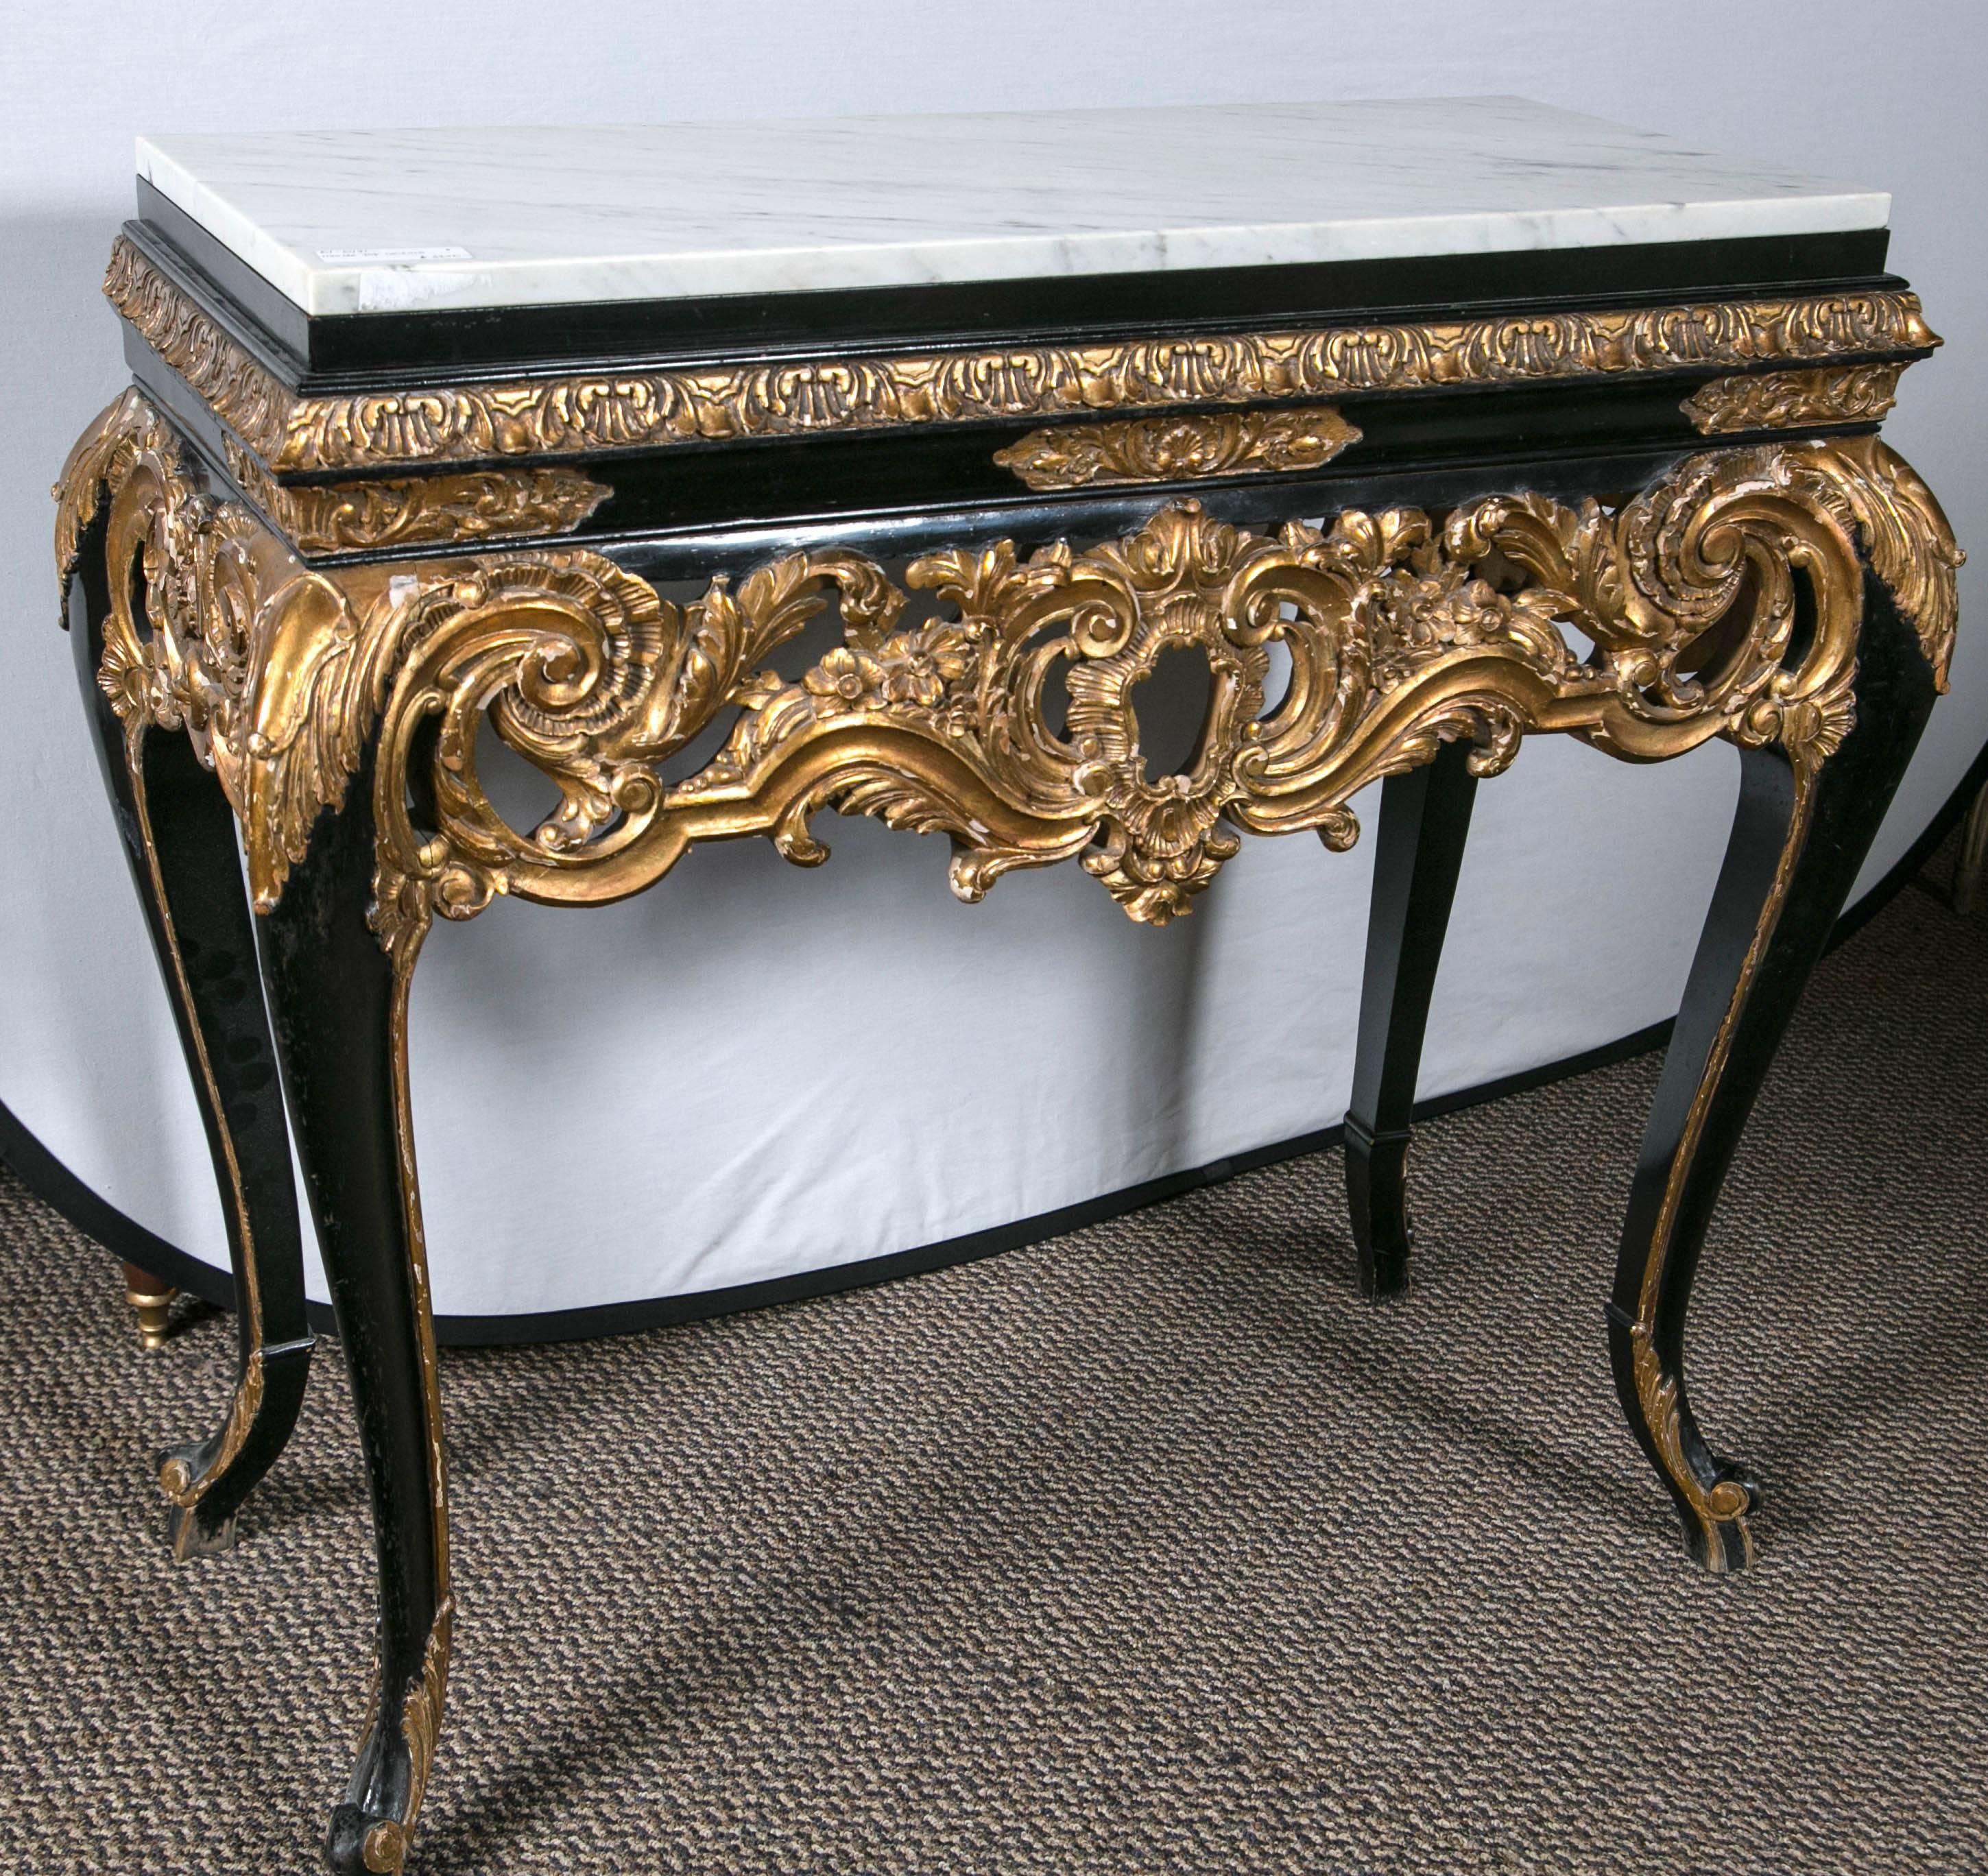 Louis XV Gilt and Ebony Decorated Marble-Top Console